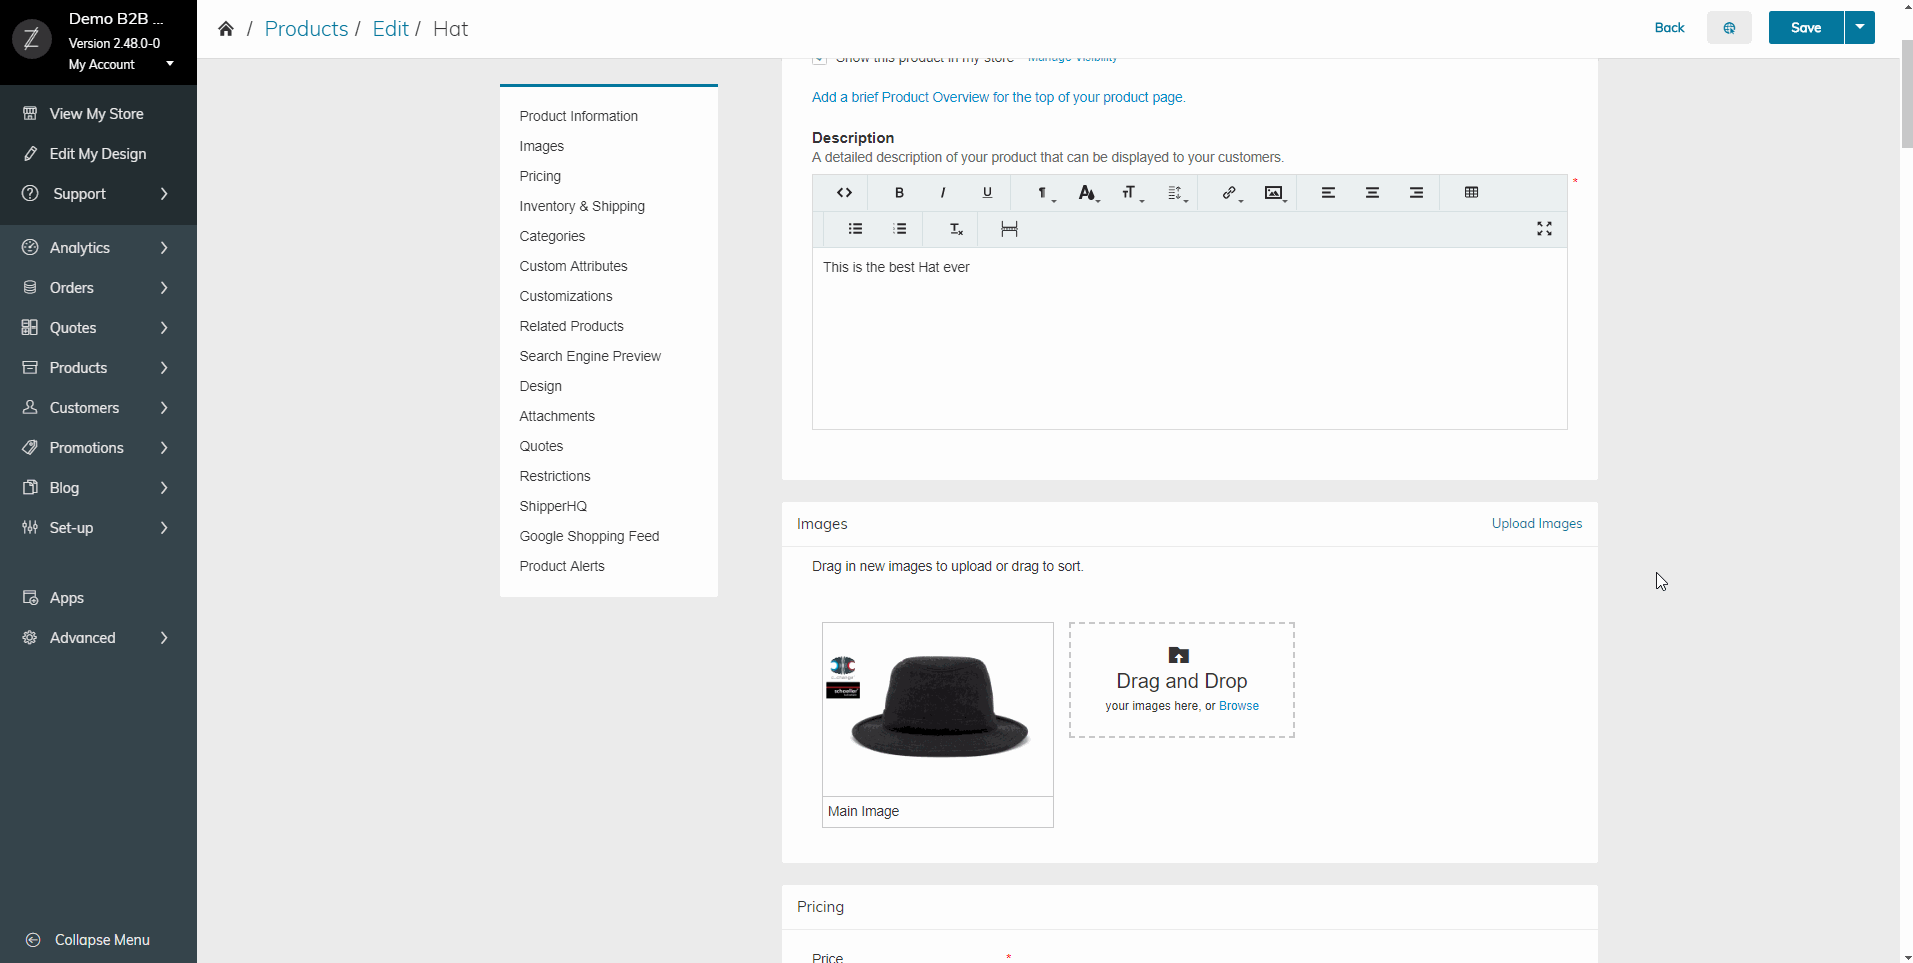 Image Rotation in admin